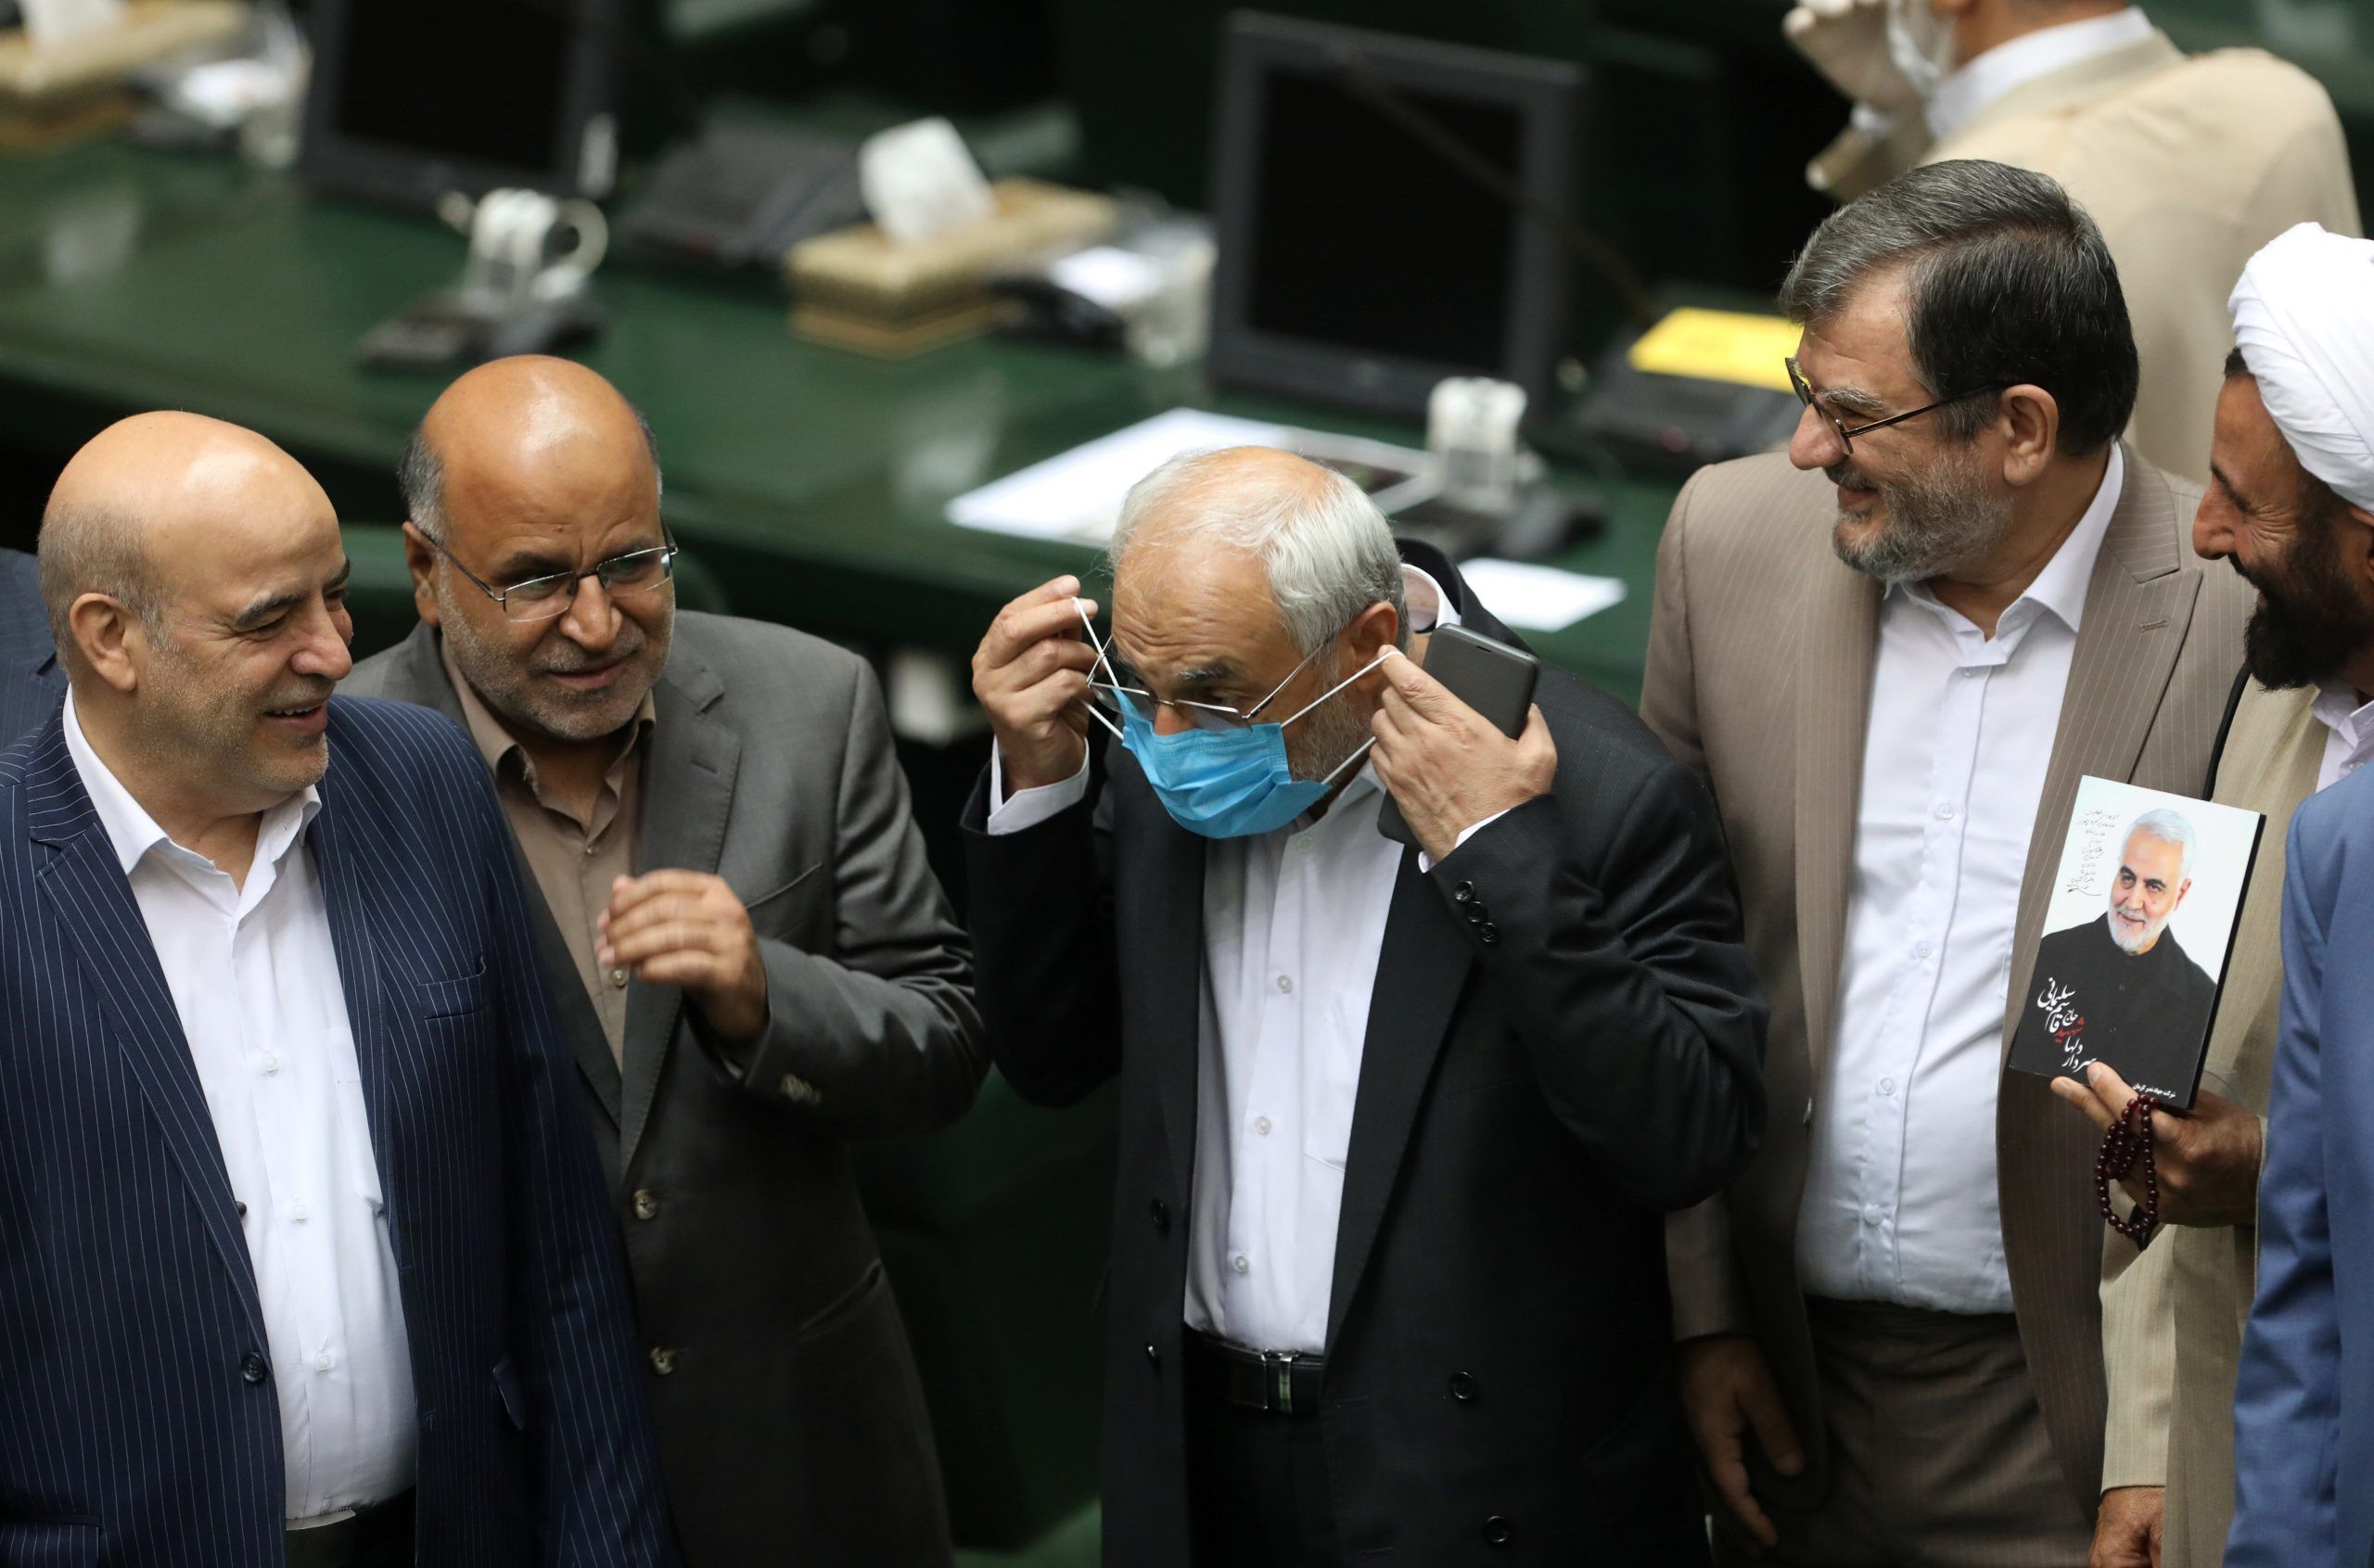 An Iranian lawmaker wears a protective face mask, as he attends the opening ceremony of Iran's 11th parliament, as the spread of the coronavirus disease (COVID-19) continues, in Tehran, Iran, May 27, 2020. 